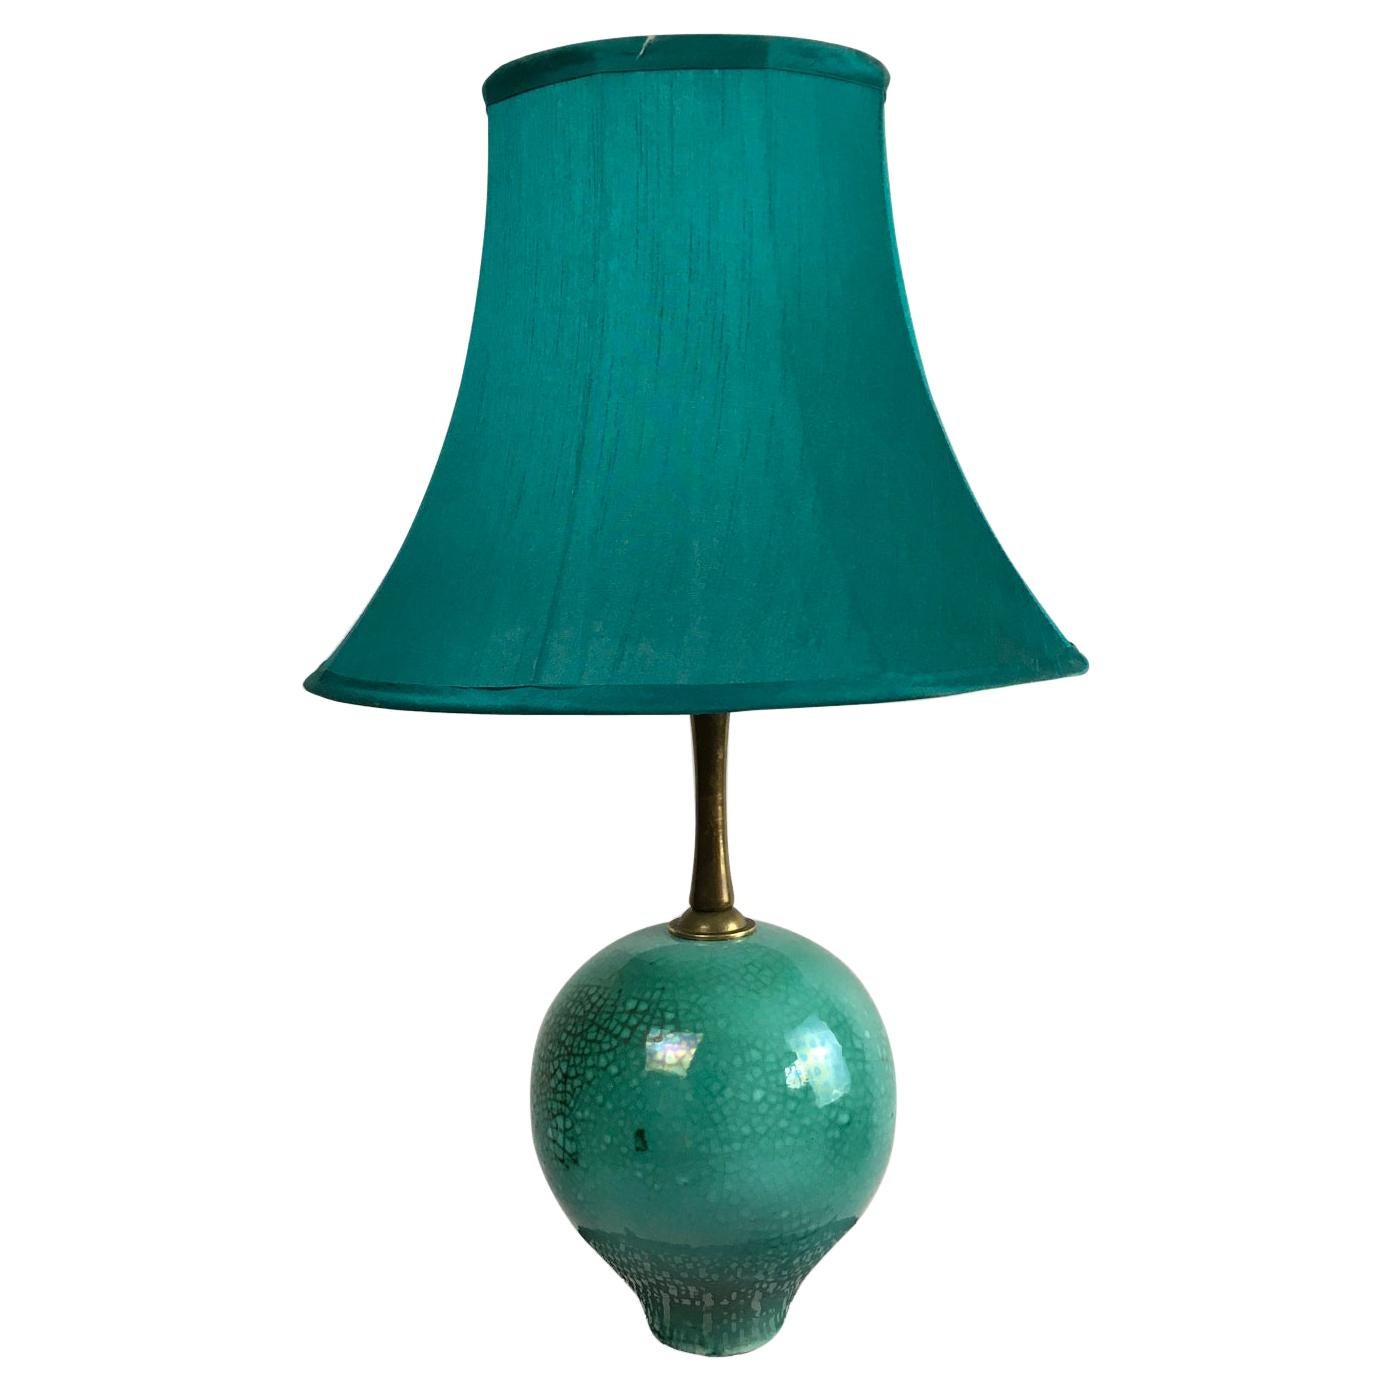 1930s Primavera Green Glazed and Cracked Ceramic Table Lamp For Sale